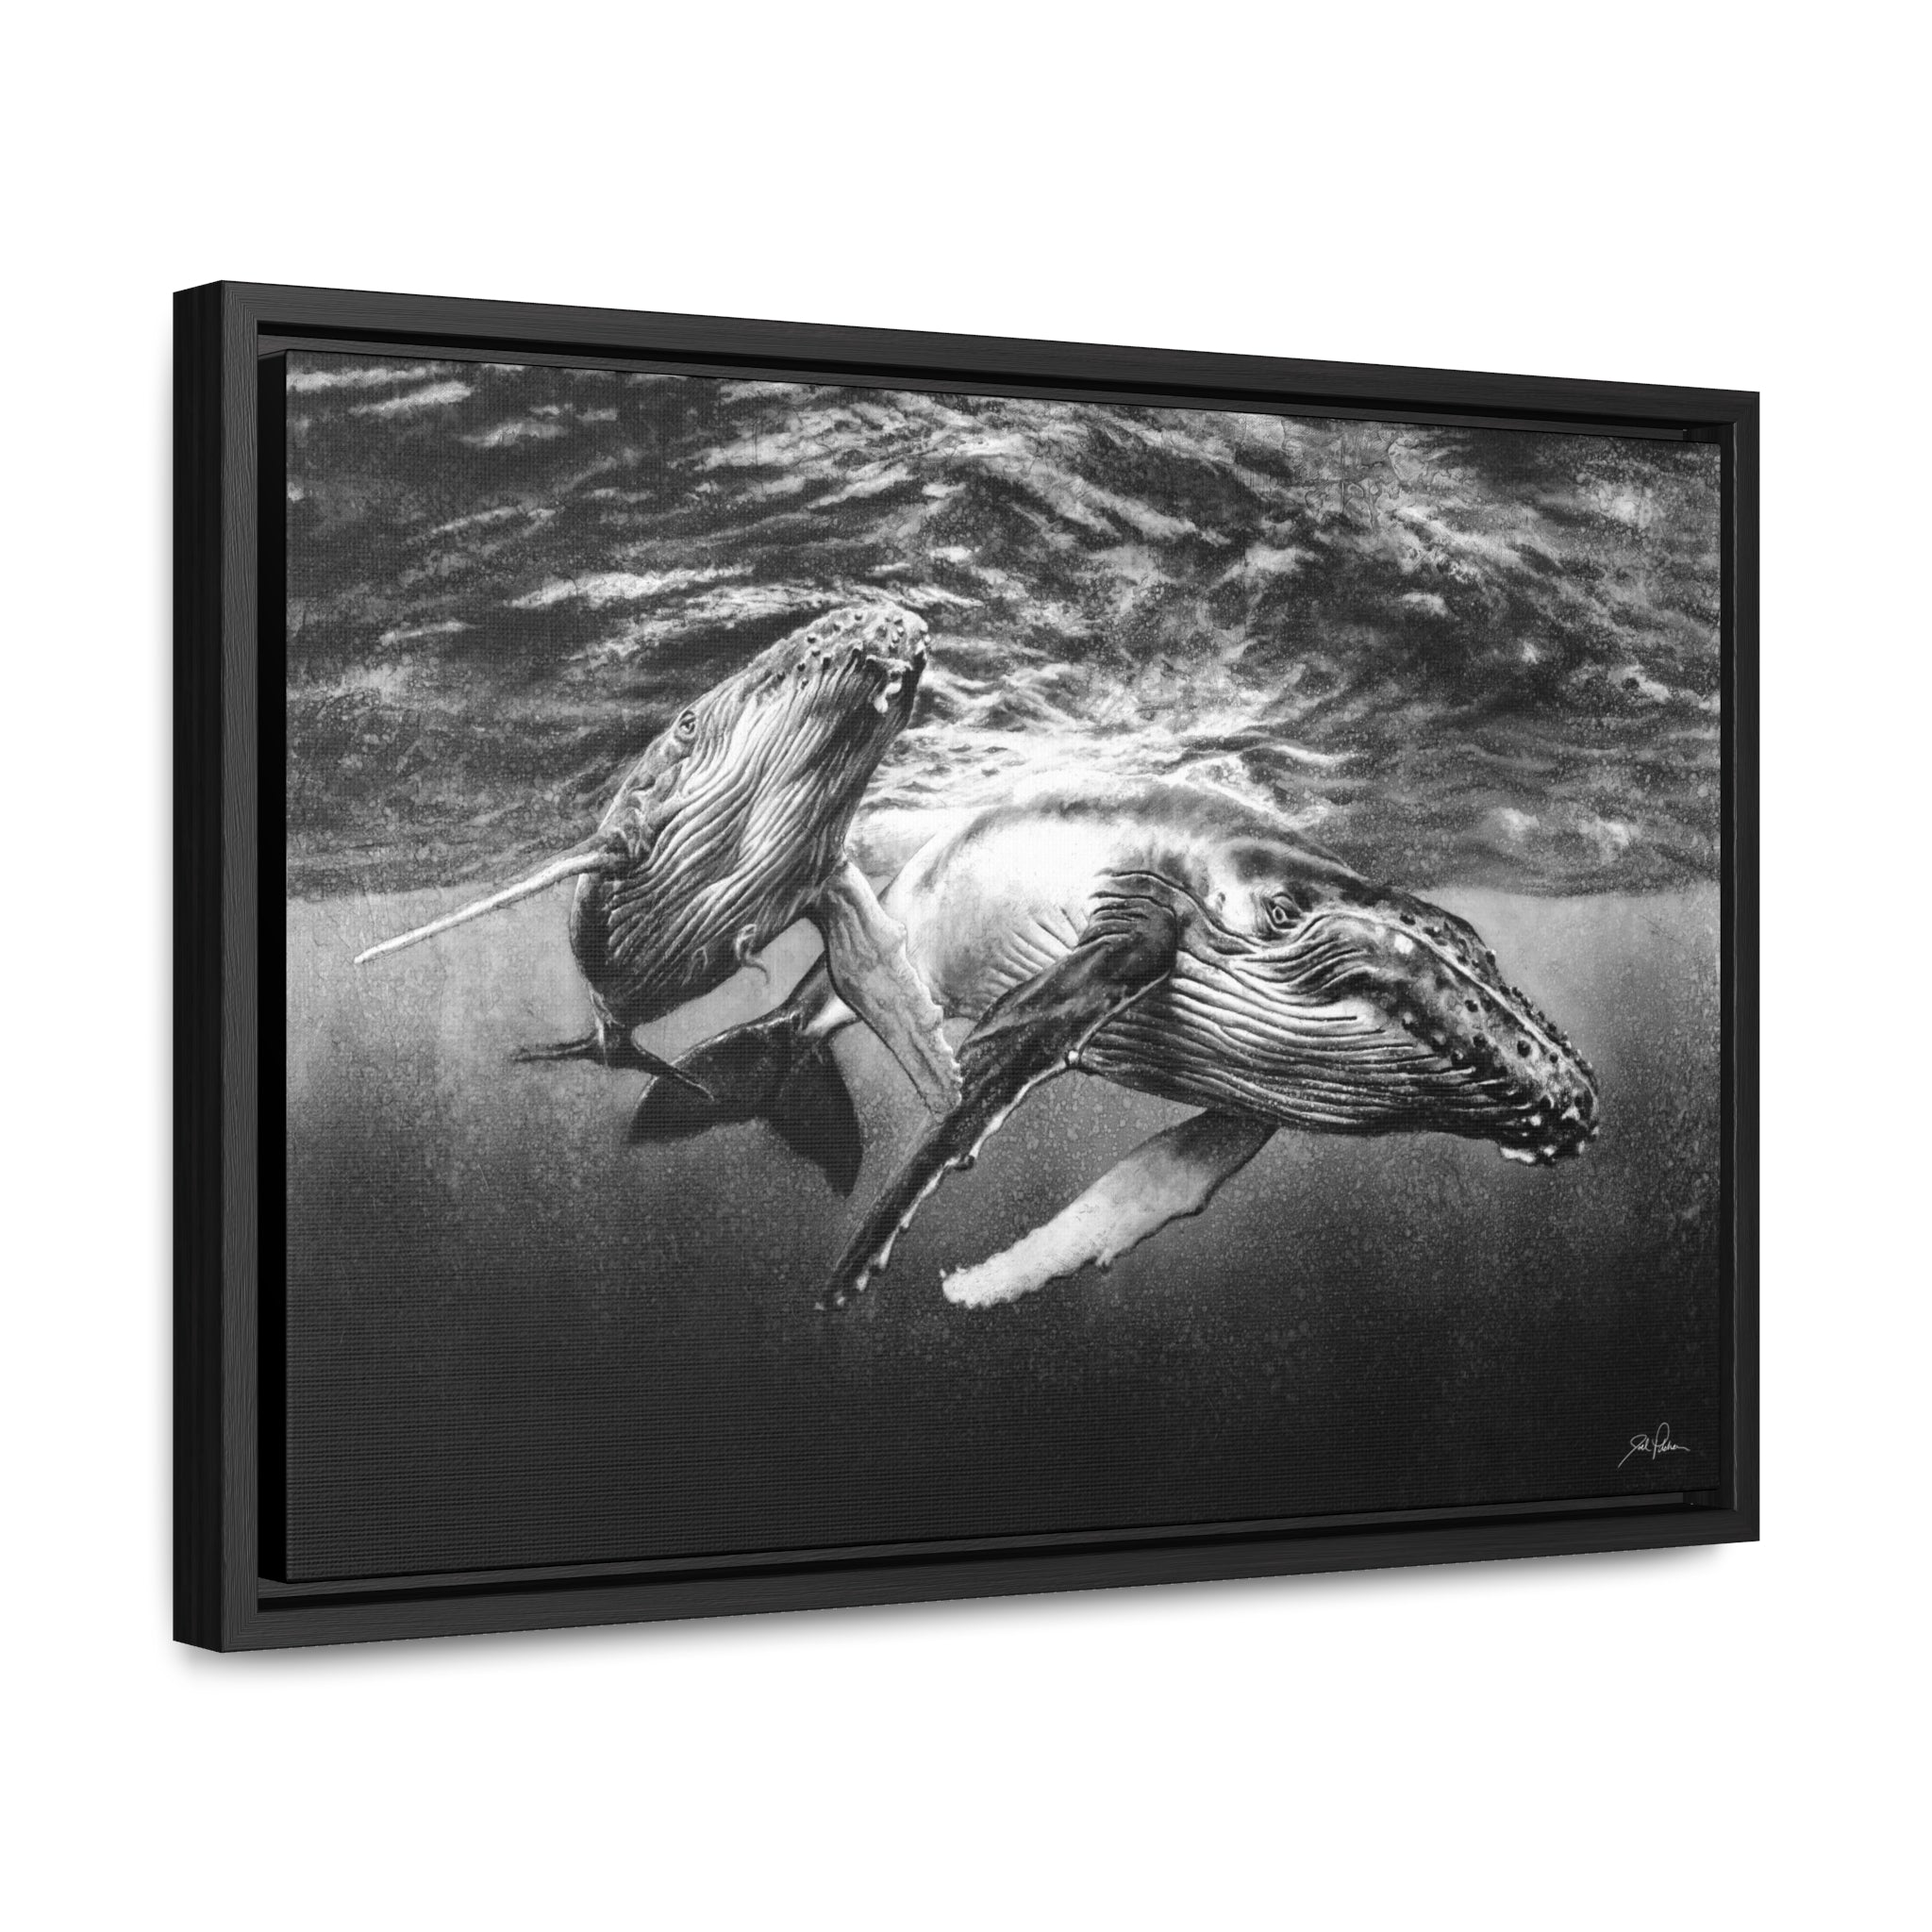 "Humpback Whales" Gallery Wrapped/Framed Canvas